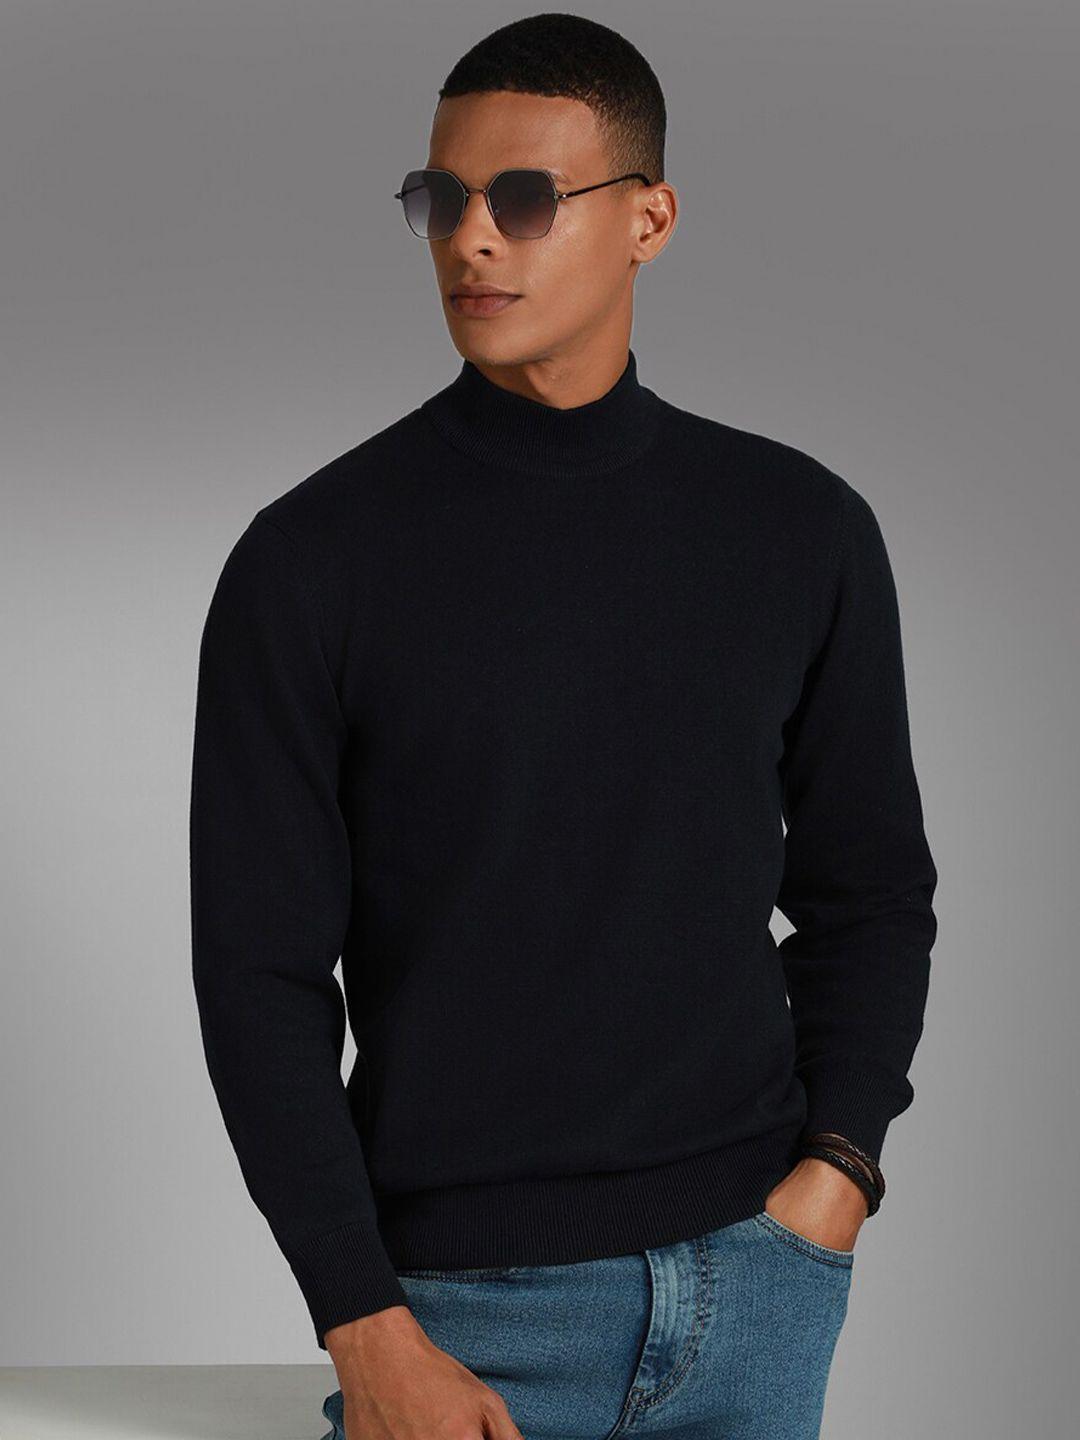 high star turtle neck long sleeves cotton pullover sweater